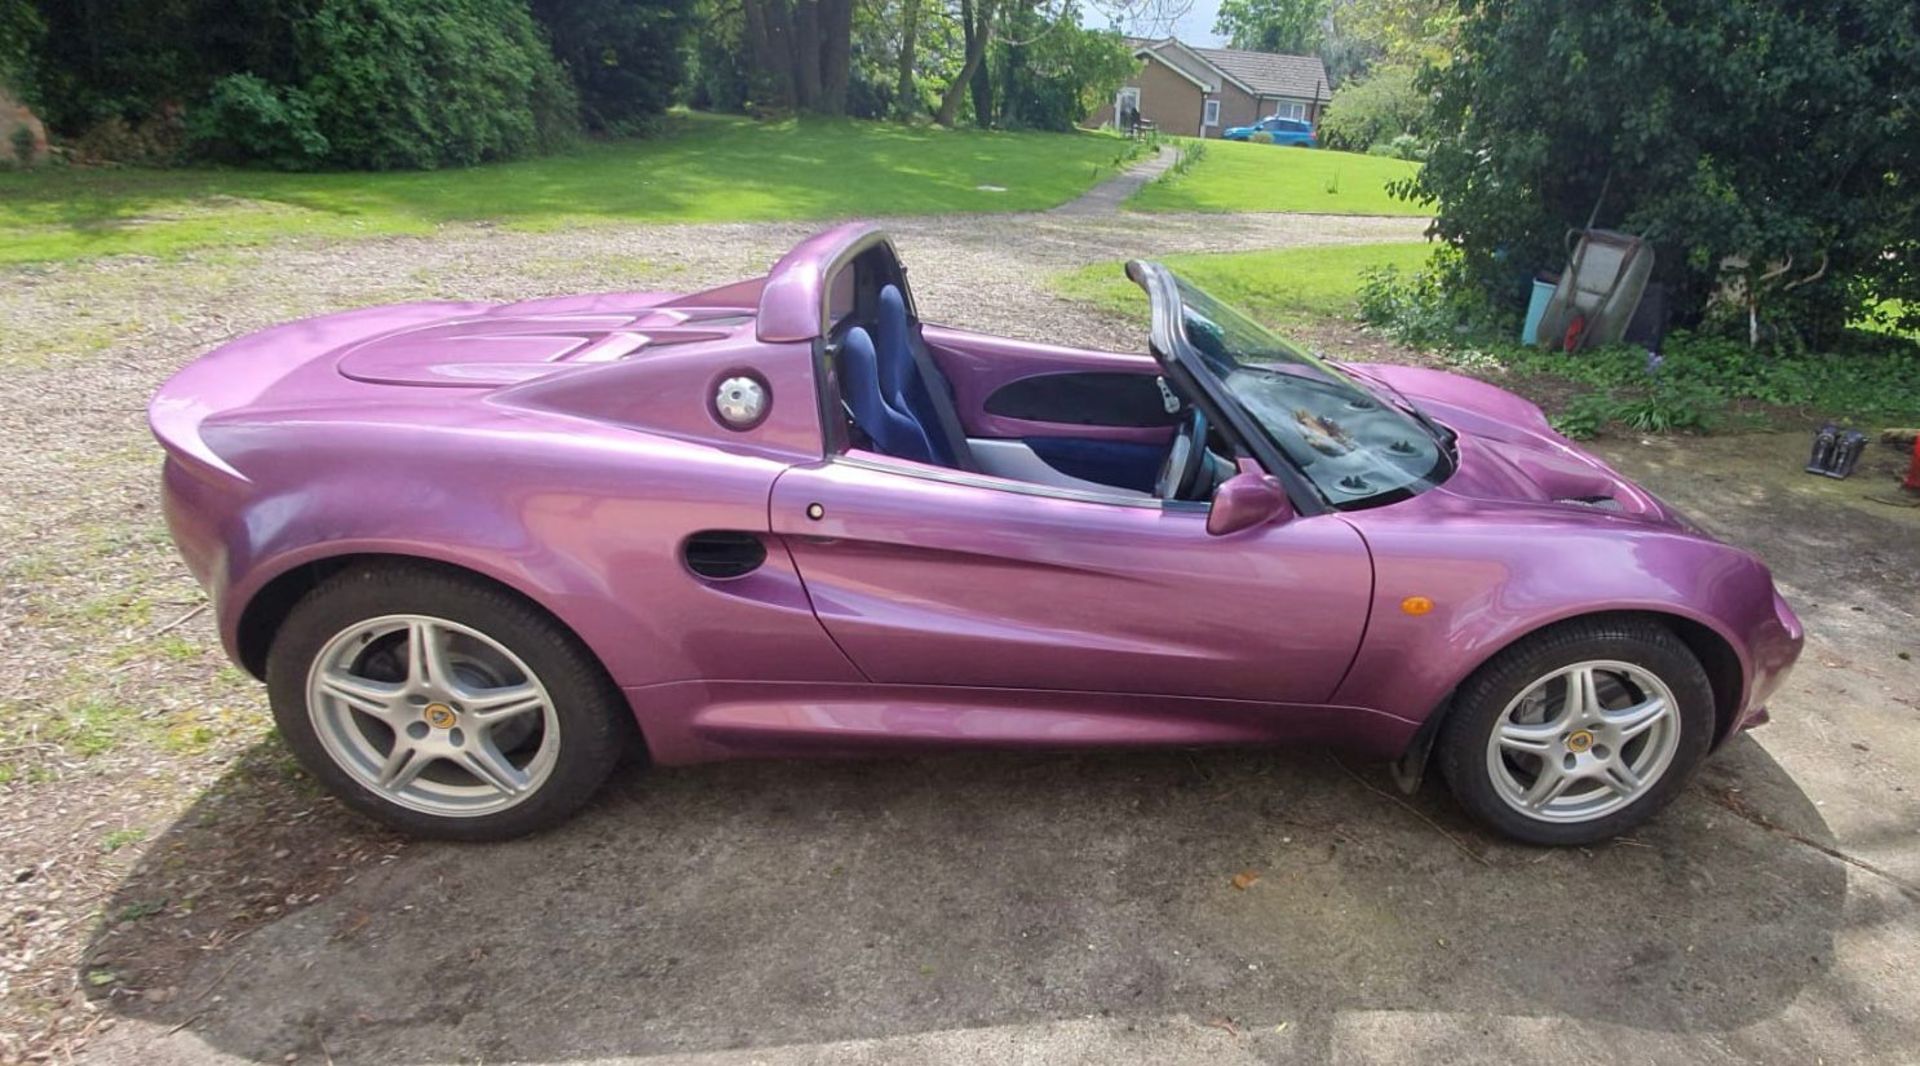 1998 Lotus Elise with mileage of 6,802 in one-off factory painted colour - Image 2 of 8